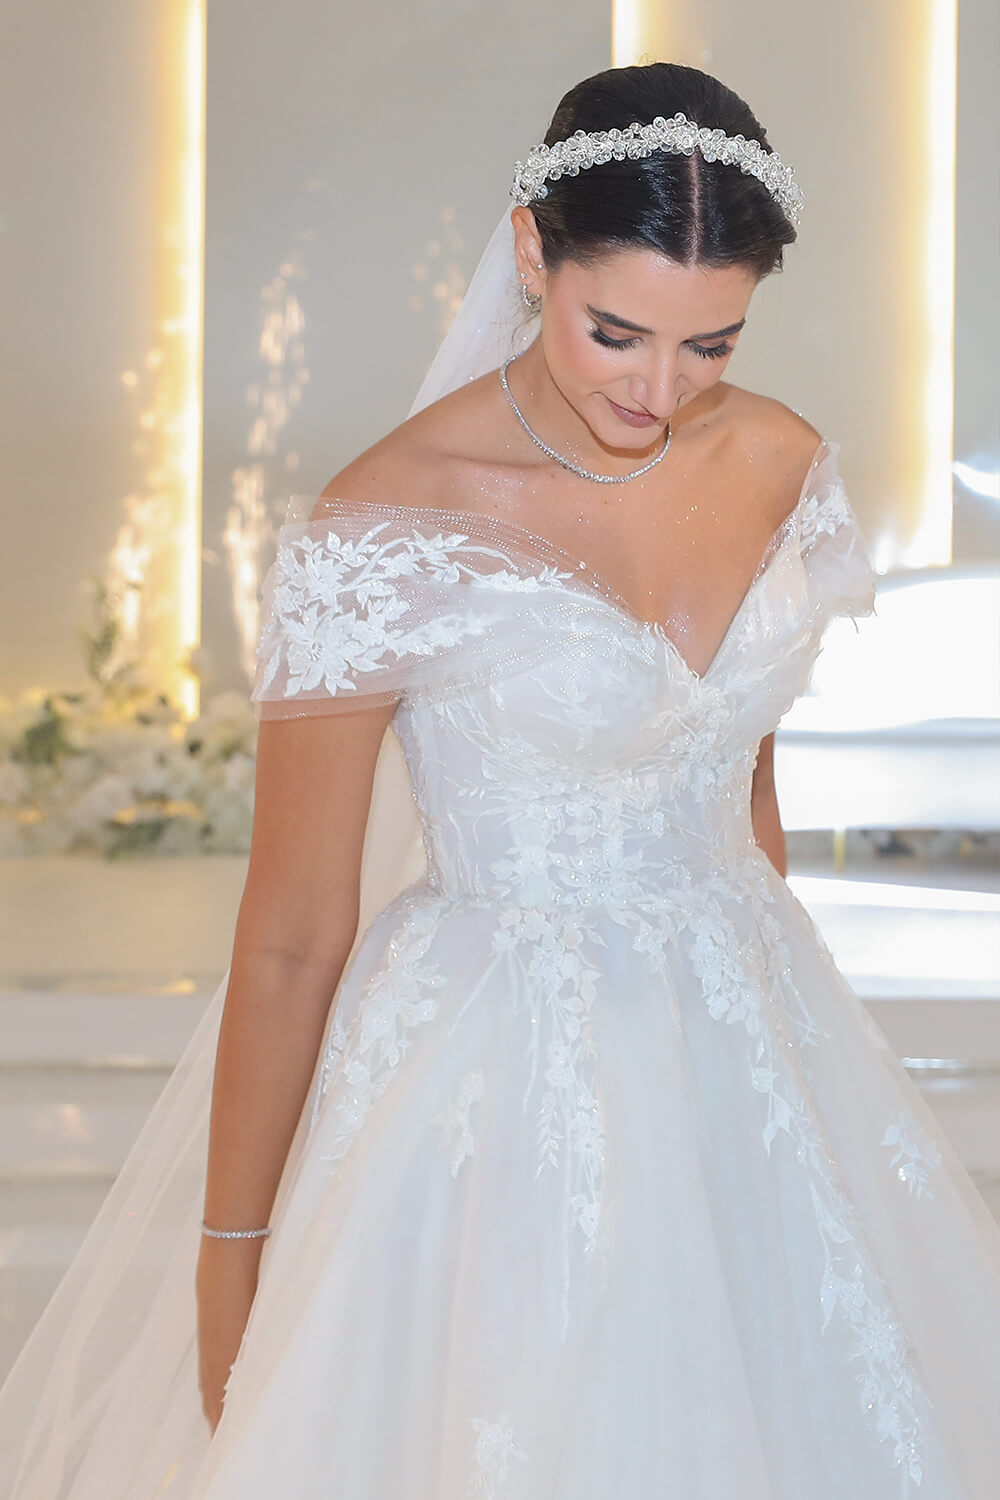 Off-the-shoulders wedding gown